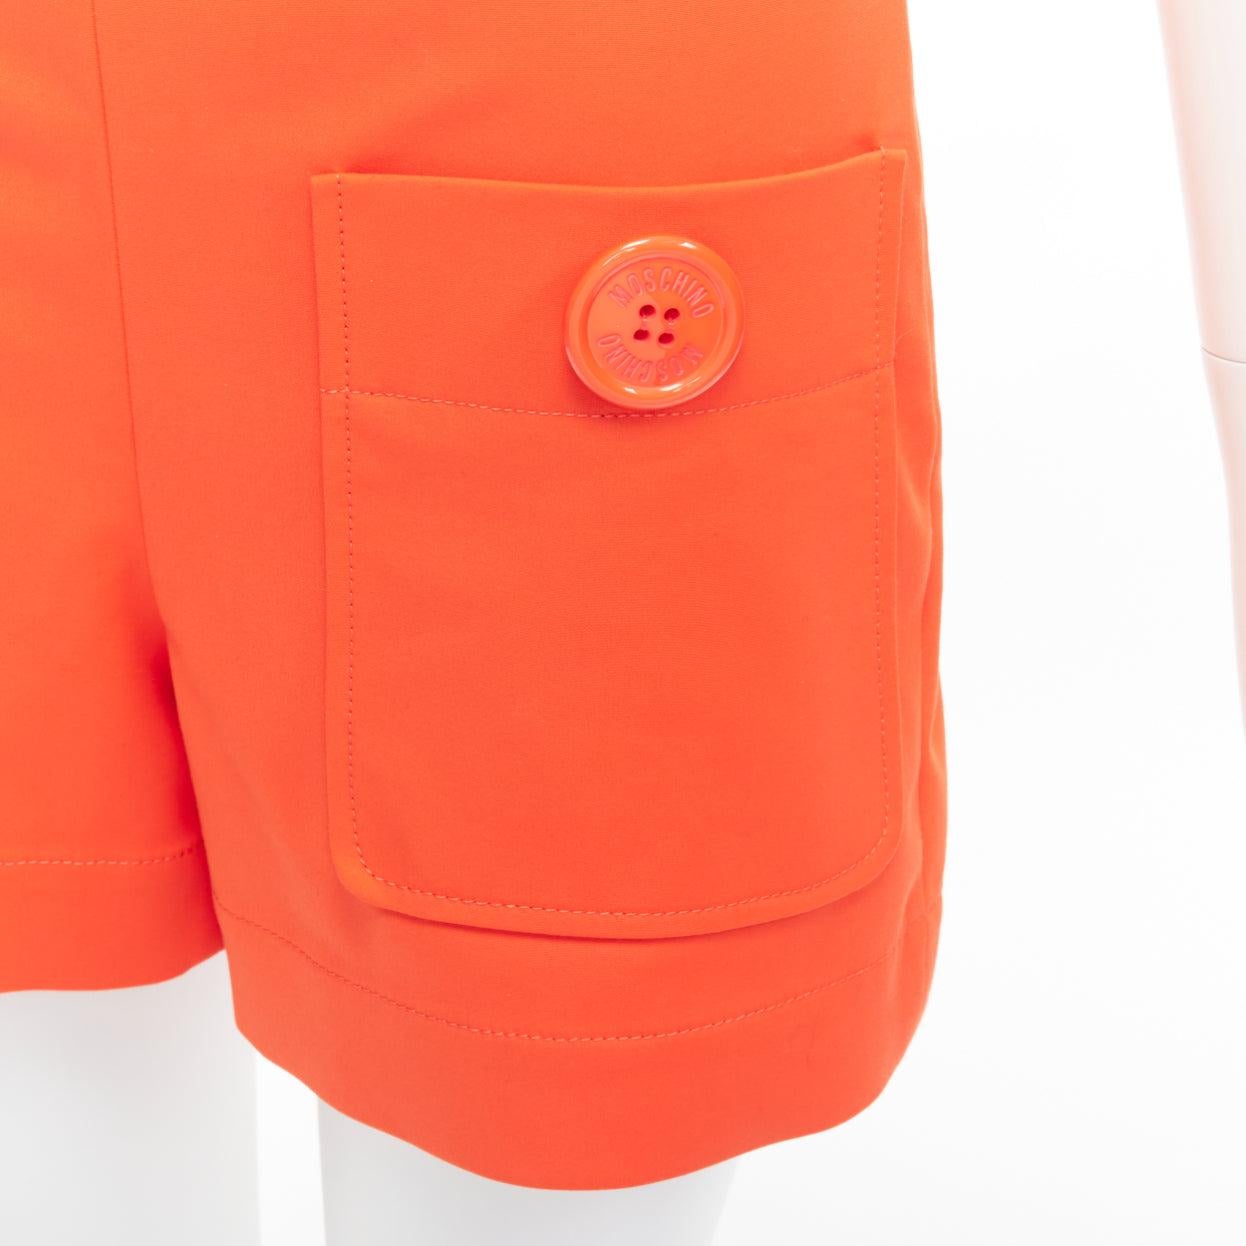 MOSCHINO bright orange oversized buttons high waist wide leg shorts IT38 XS
Reference: KYCG/A00001
Brand: Moschino
Designer: Jeremy Scott
Material: Polyamide, Blend
Color: Orange
Pattern: Solid
Closure: Zip
Extra Details: Side zip.
Made in: